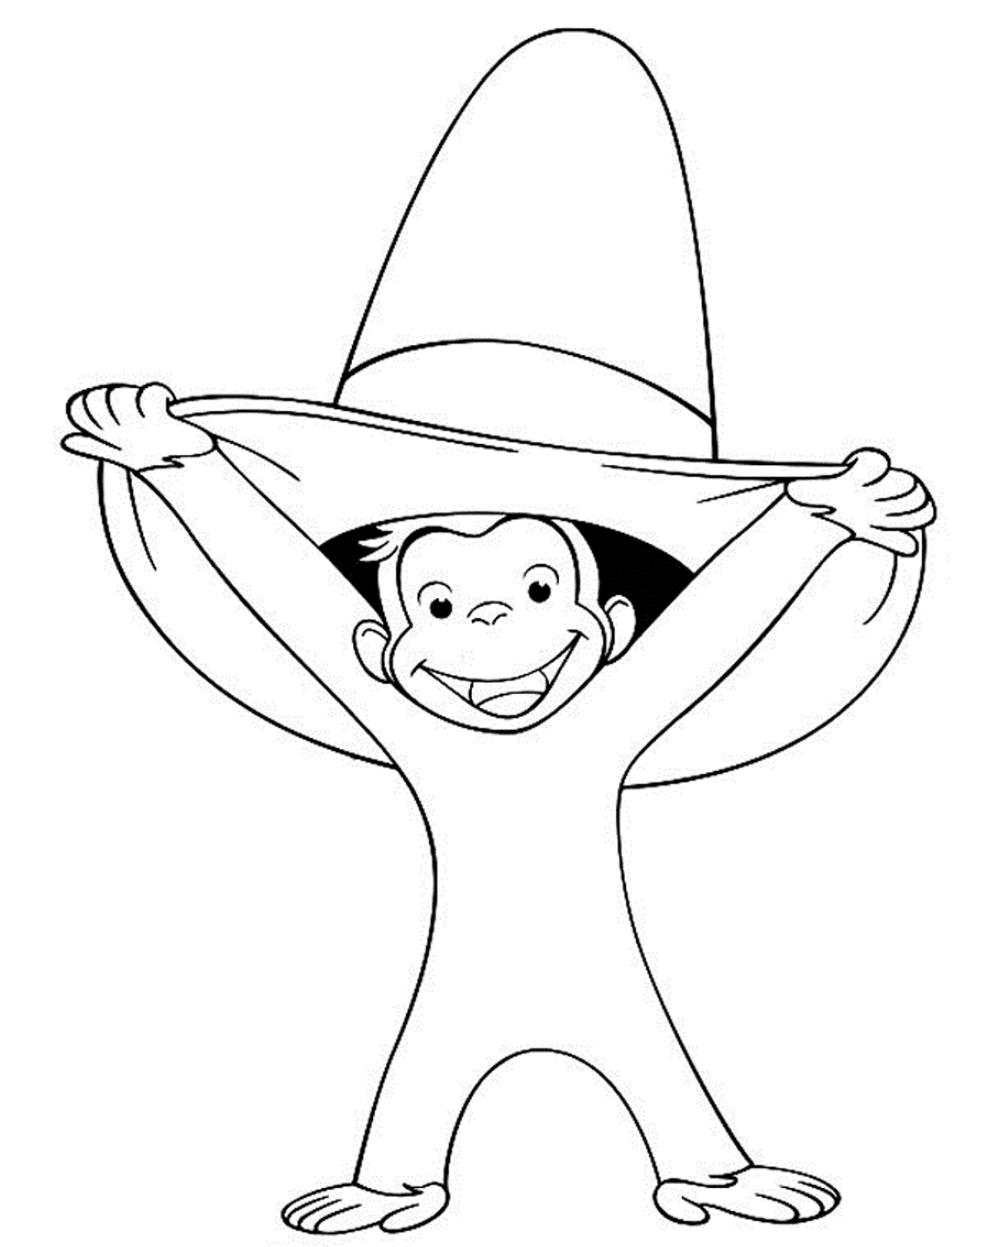 Curious George Coloring Pages | K5 Worksheets | Curious george coloring  pages, Curious george birthday, Birthday coloring pages